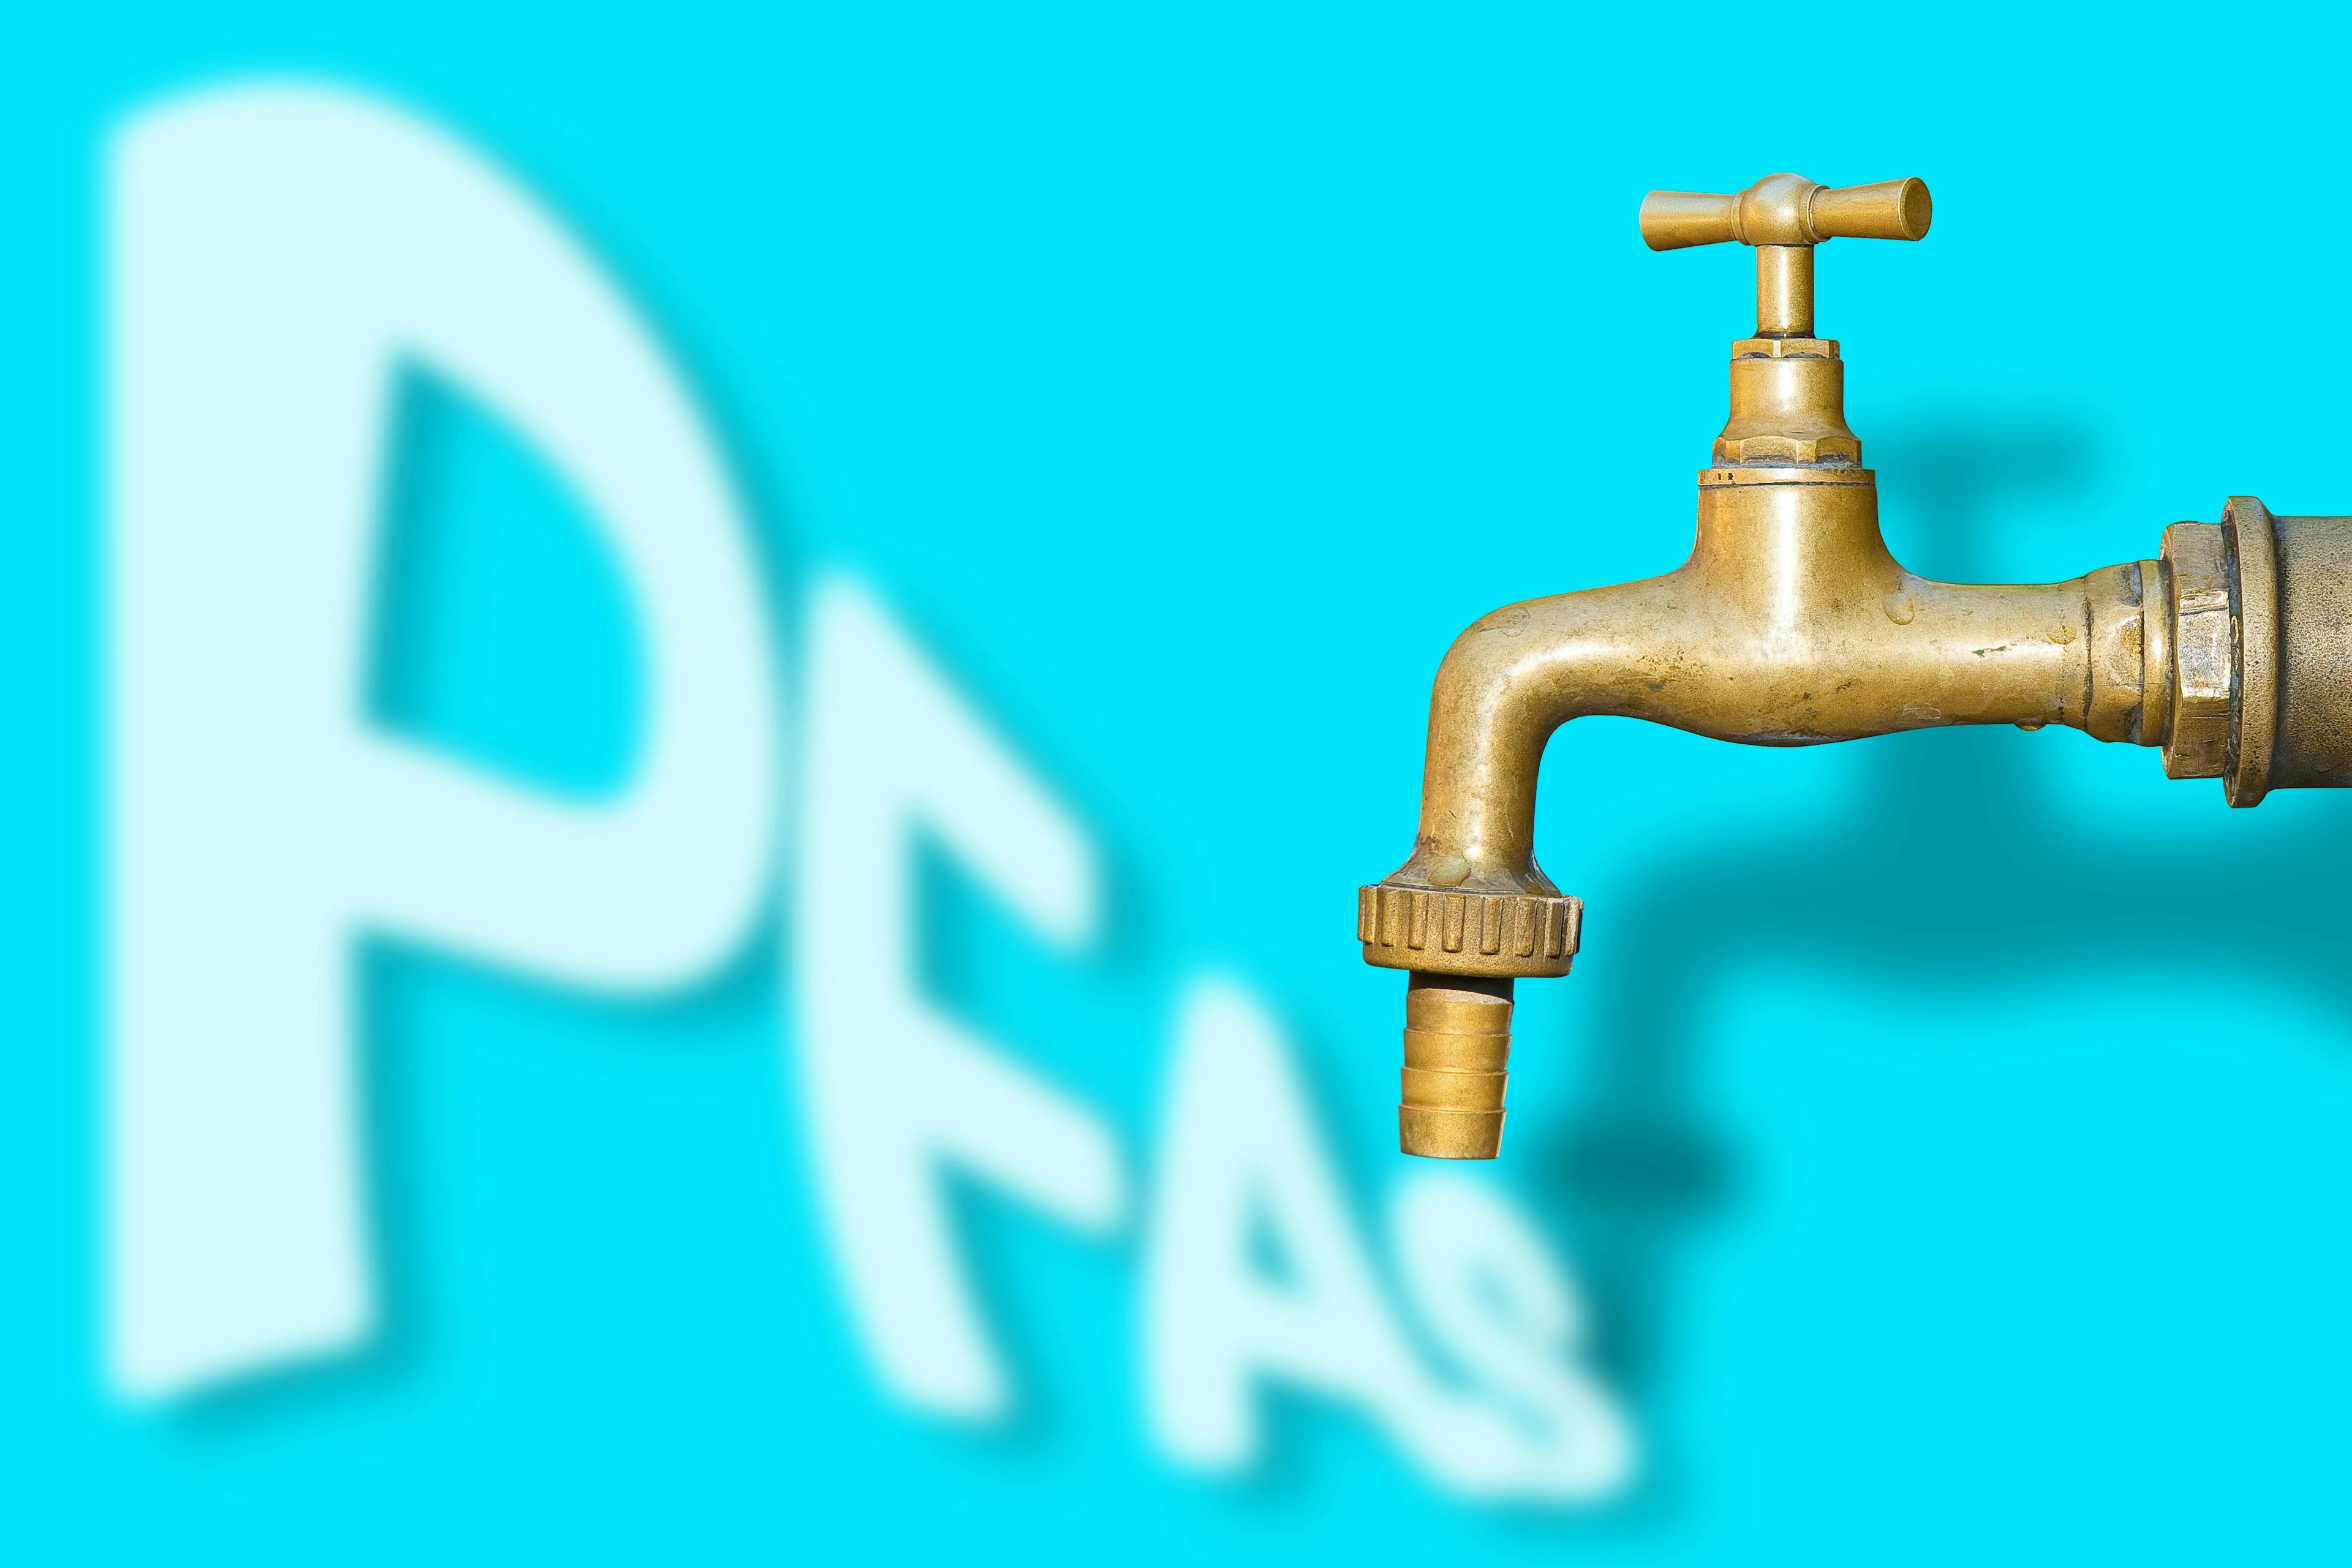 Alertness about dangerous PFAS Perfluoroalkyl and Polyfluoroalkyl substances in drinking water - concept image | Image Credit: © Francesco Scatena - stock.adobe.com